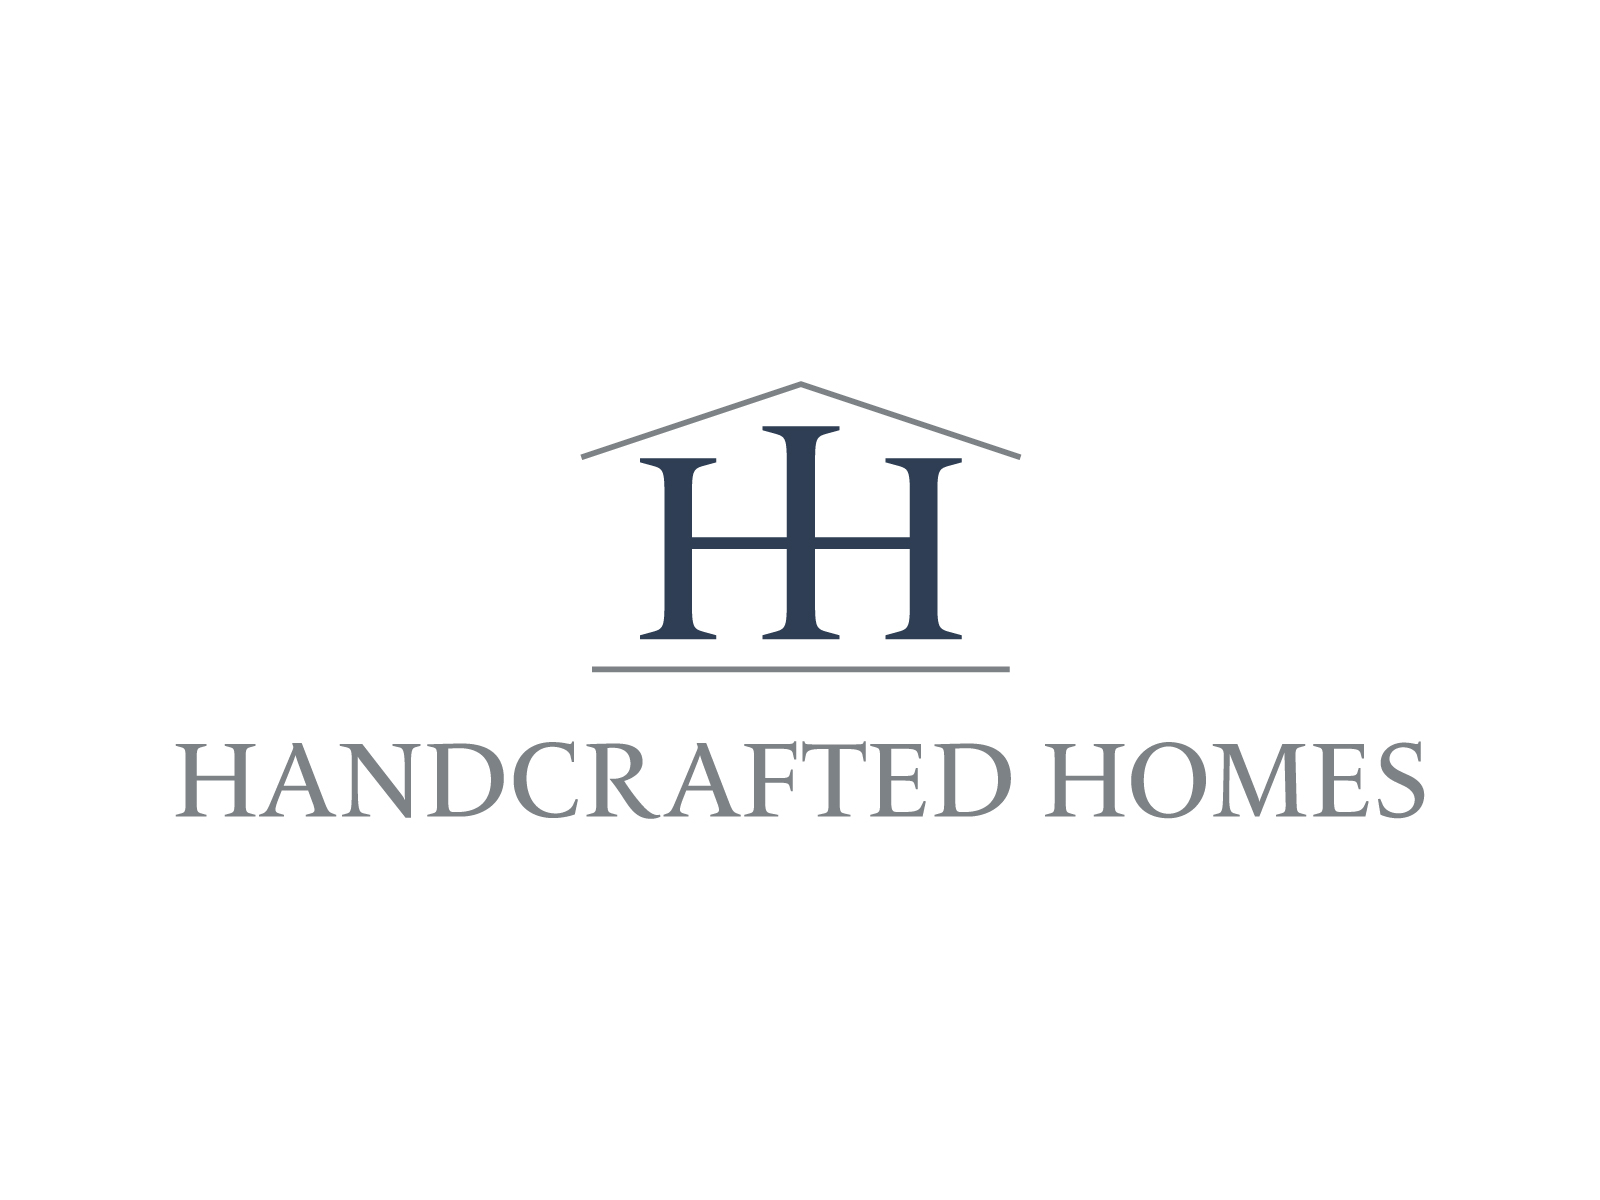 Handcrafted Homes logo design by Andréa Day on Dribbble